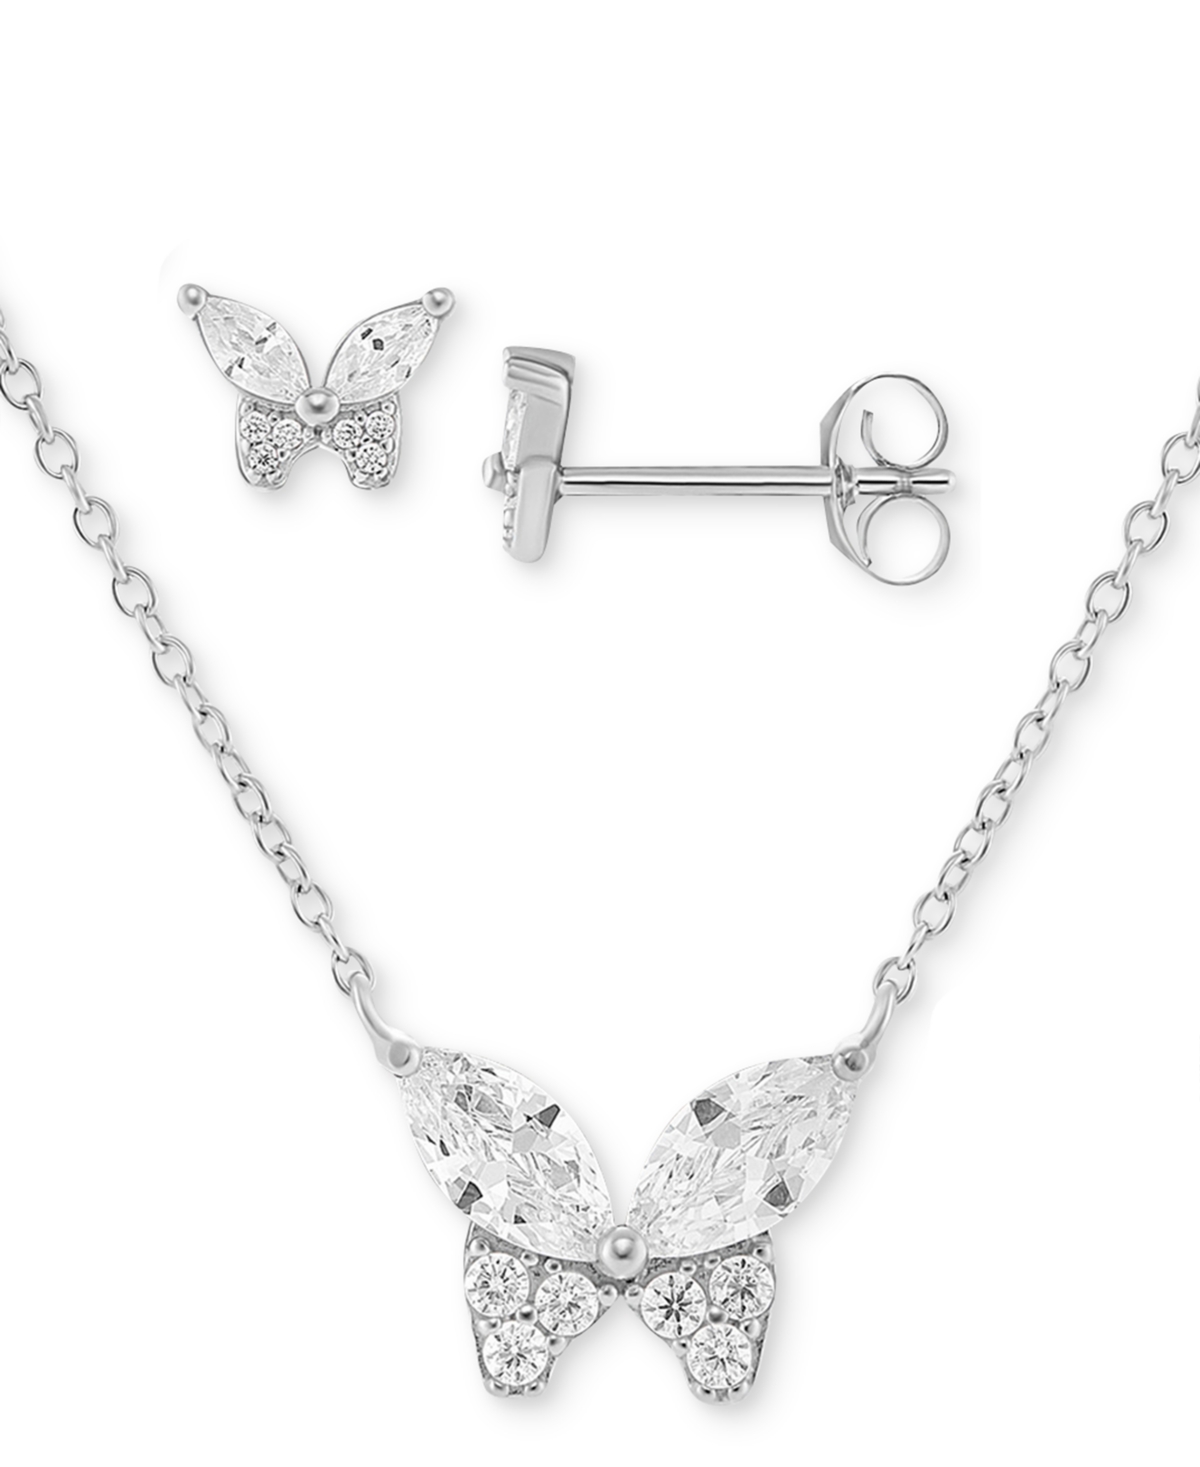 2-Pc. Set Cubic Zirconia Butterfly Pendant Necklace & Matching Stud Earrings in Sterling Silver, Created for Macy's - Sterling Silver